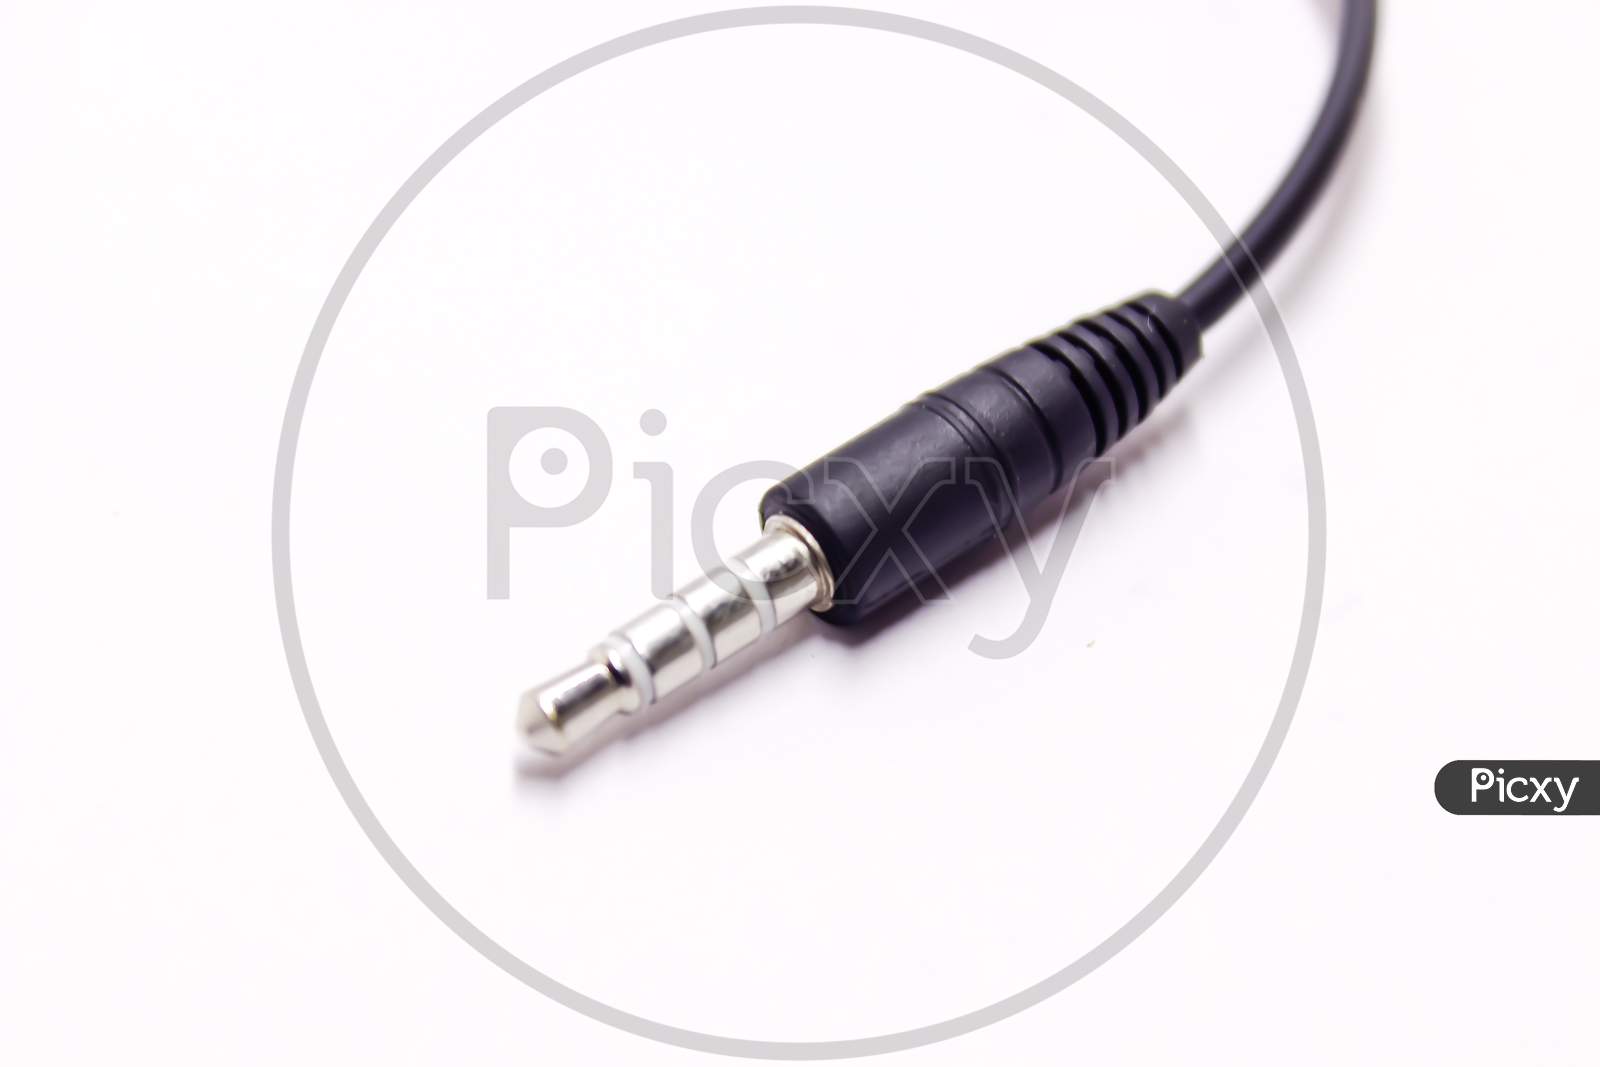 3.5mm Earphones Jack Over An Isolated White Background